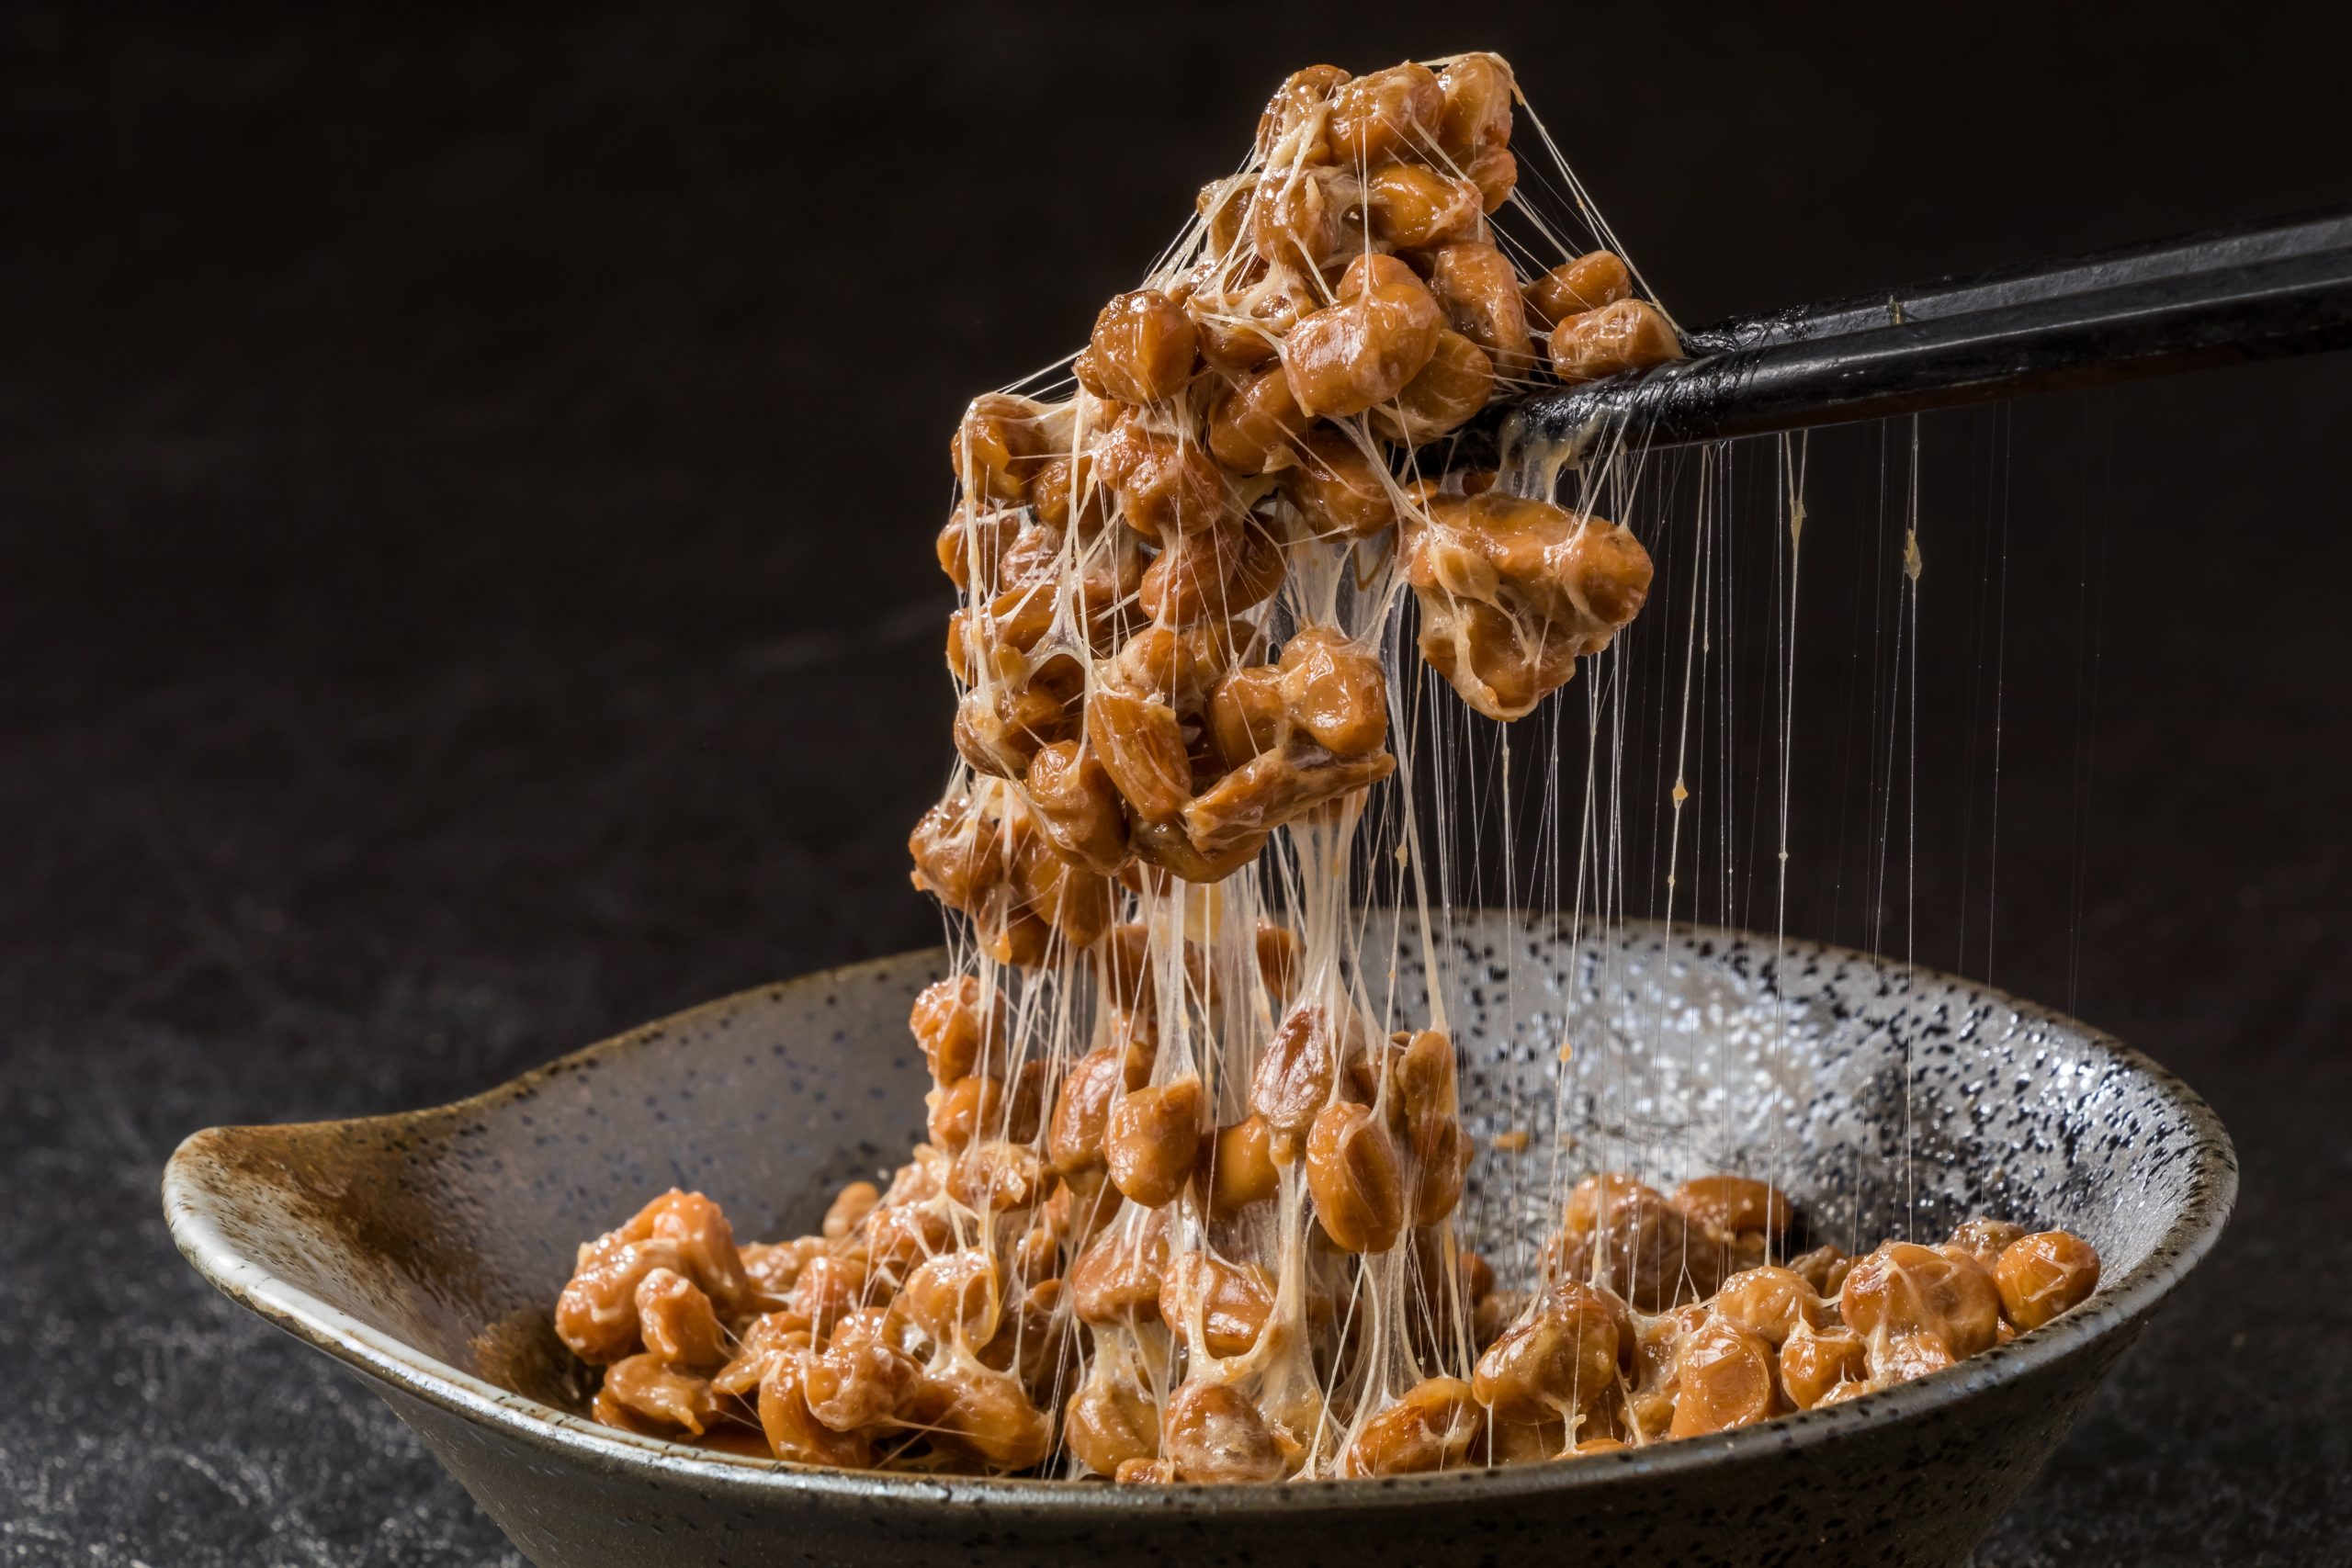 Natto is a delicious traditional Japanese food